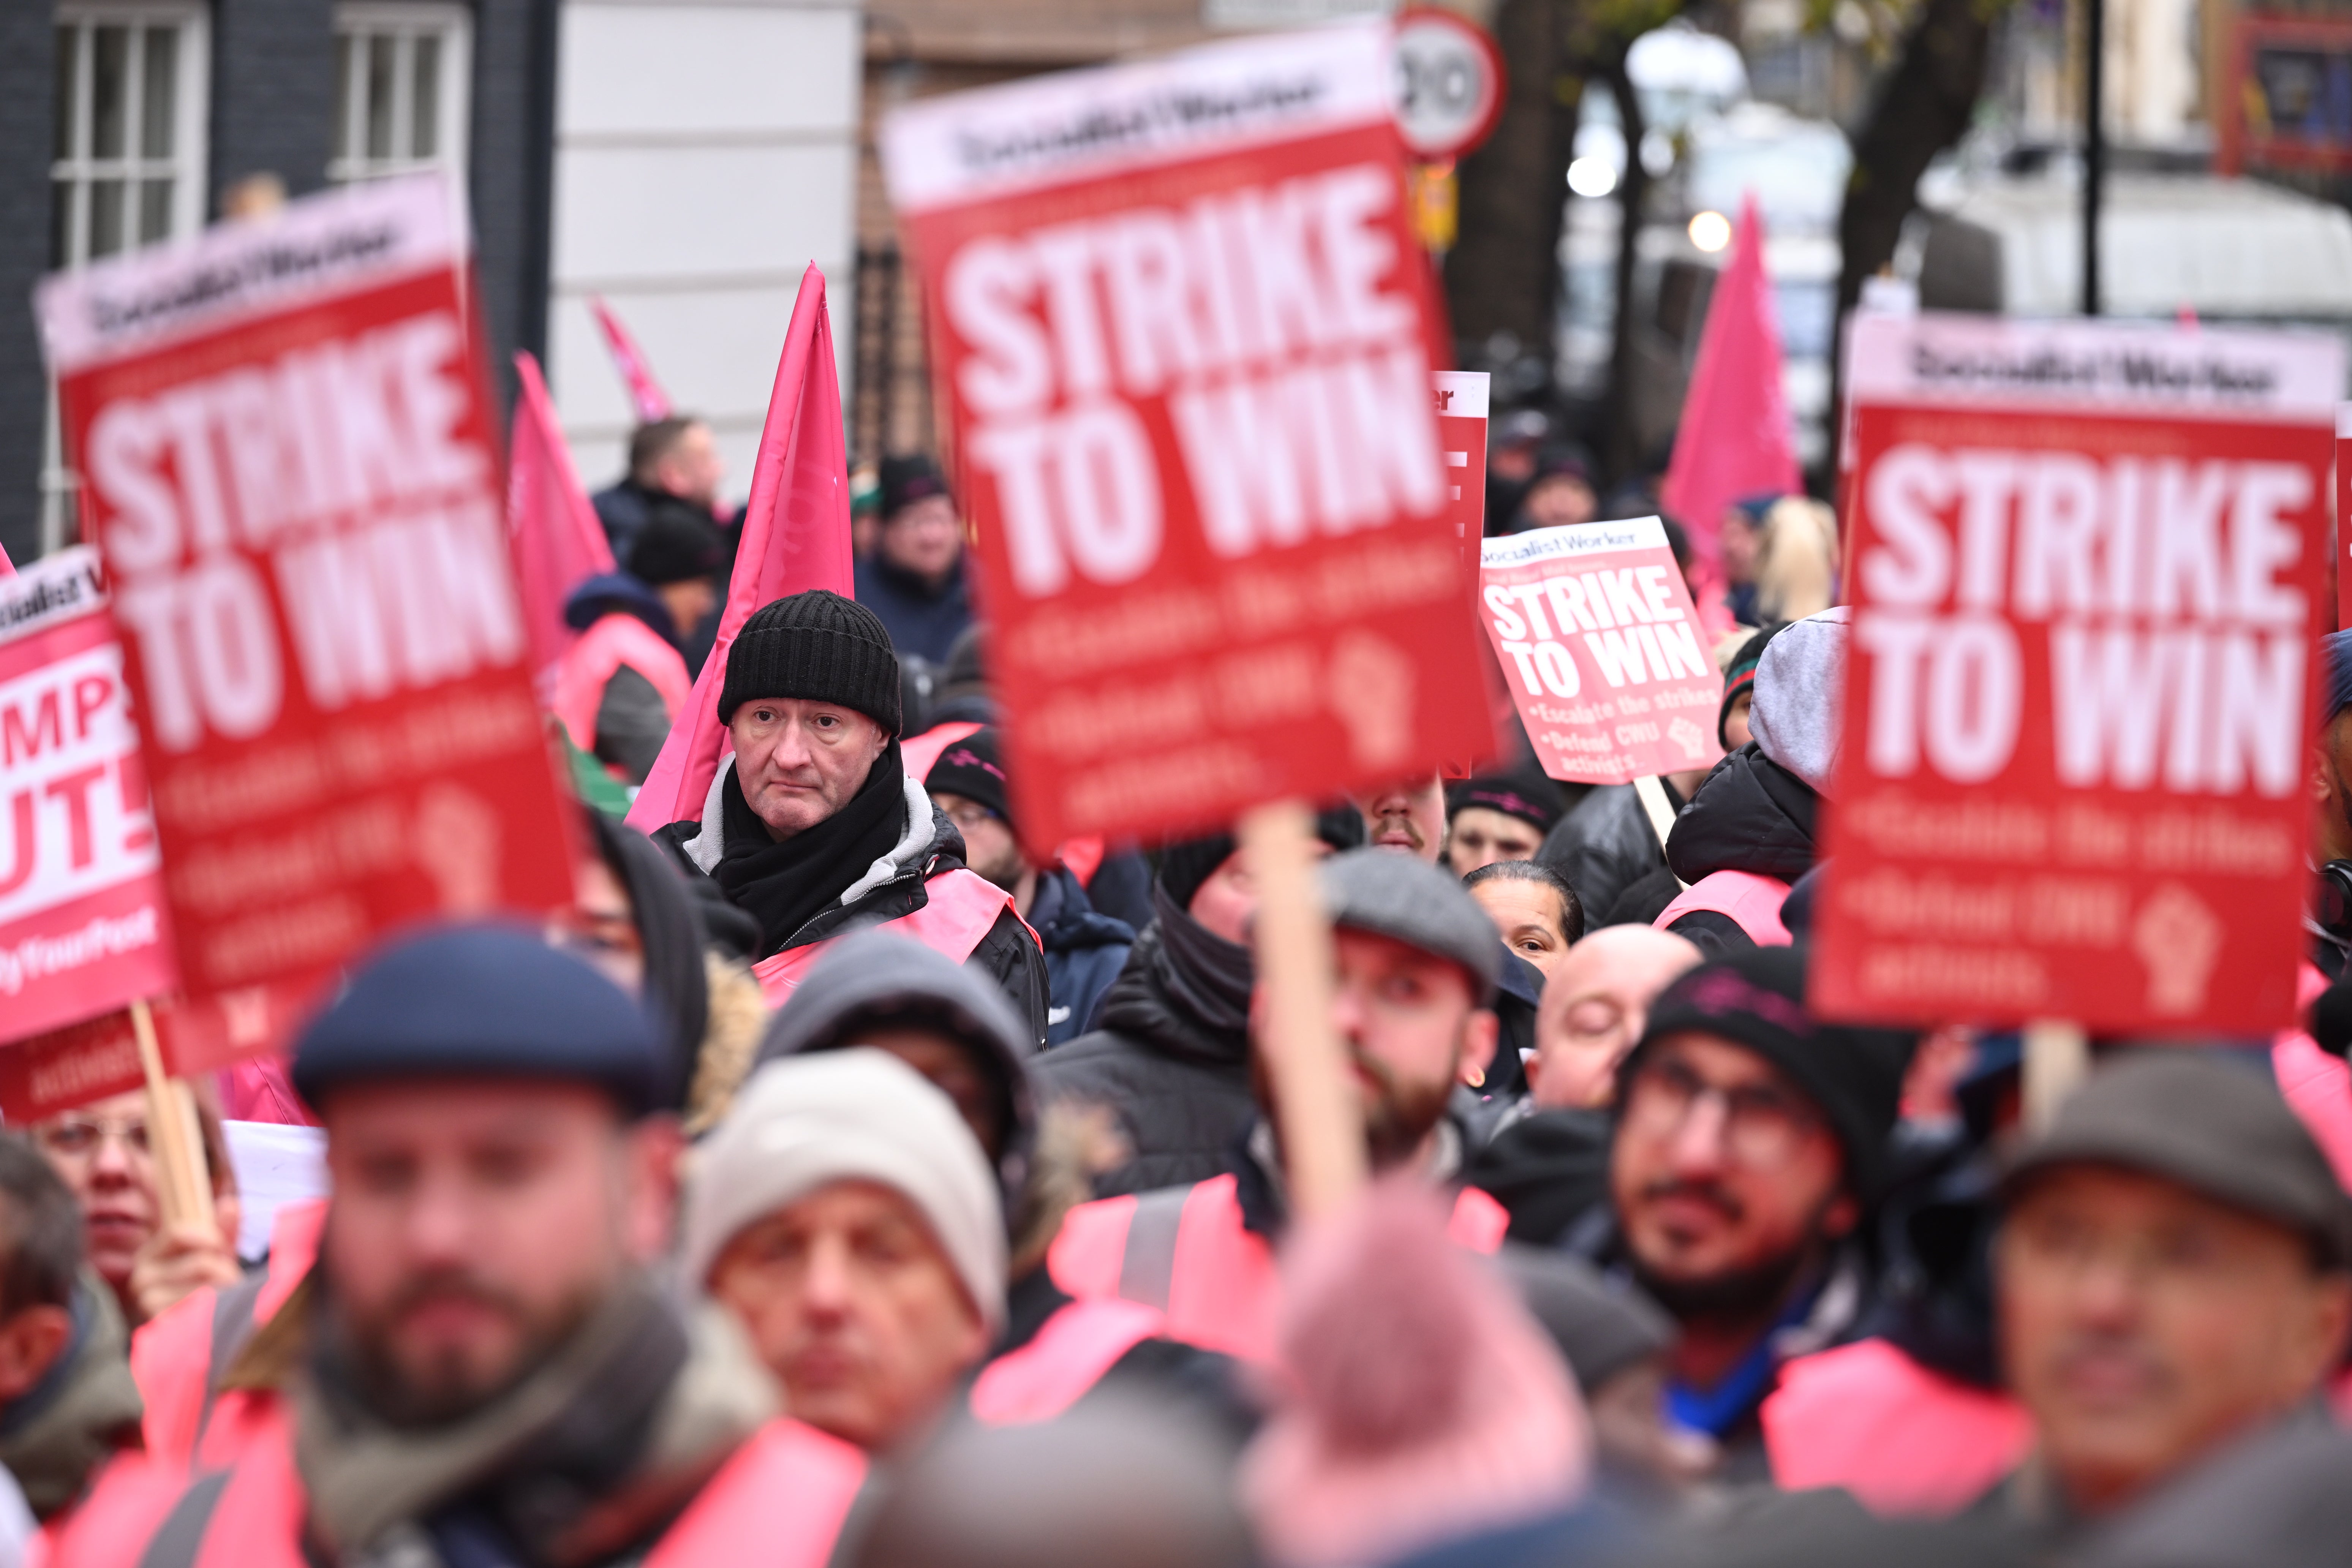 Britain was gripped by energy and cost of living crises and then a second winter of discontent with widespread strike action across the public sector